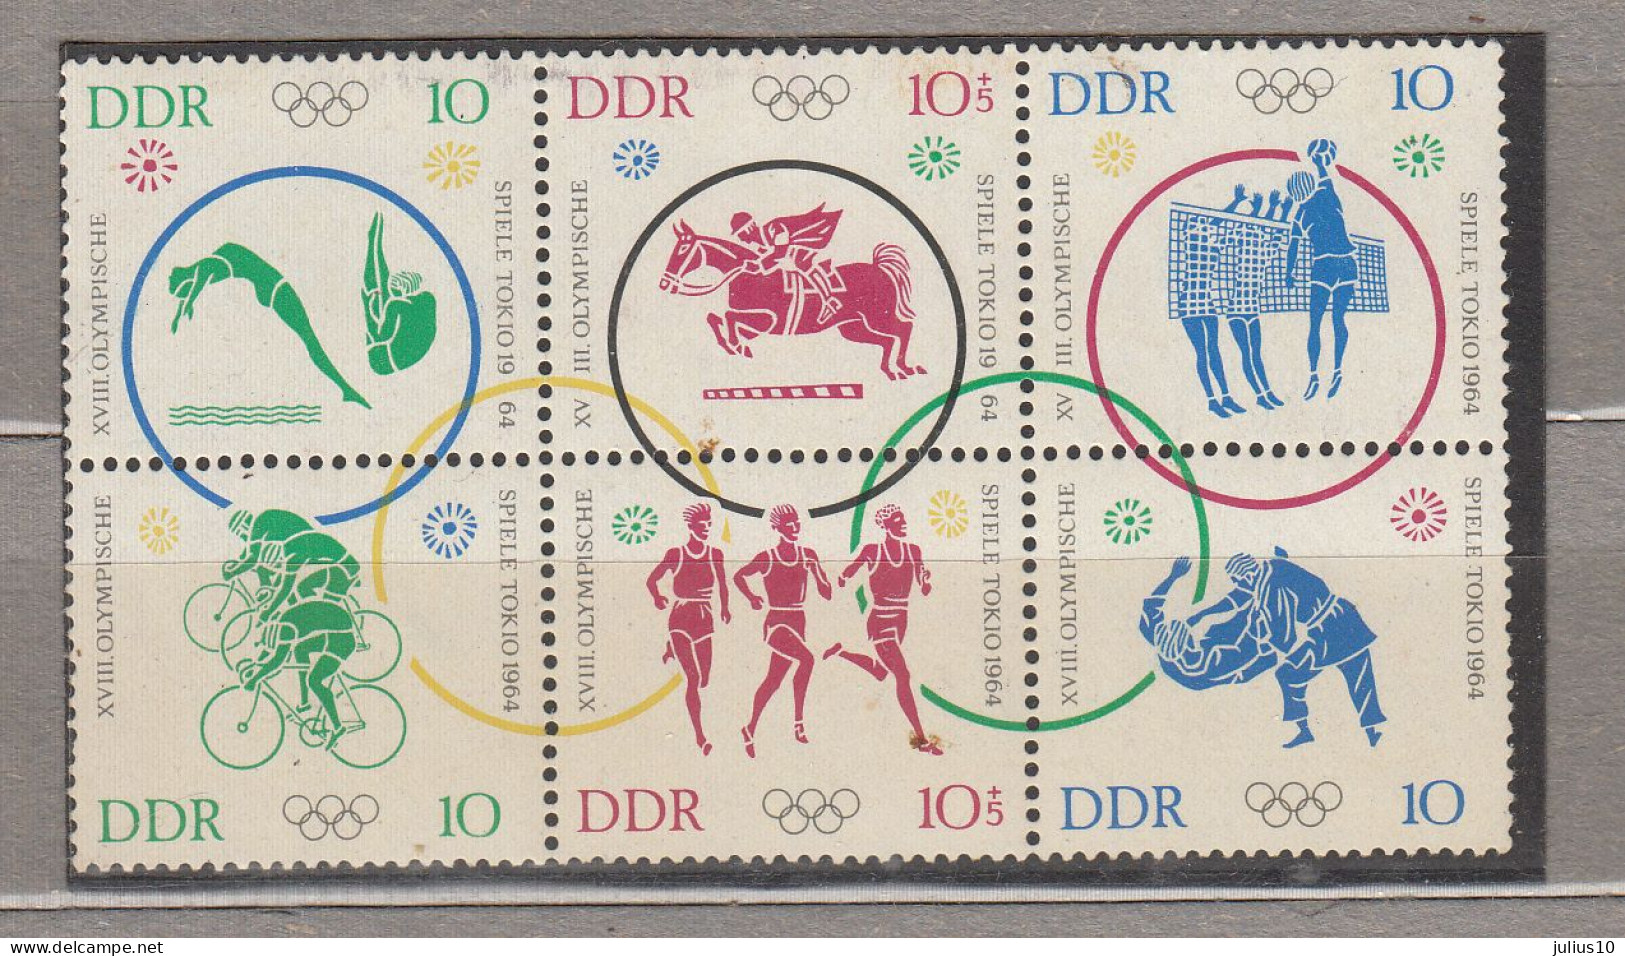 GERMANY DDR Olympic Games 1964 MNH (**) Michel 1039-1044 #Sp190 - Zomer 1964: Tokyo